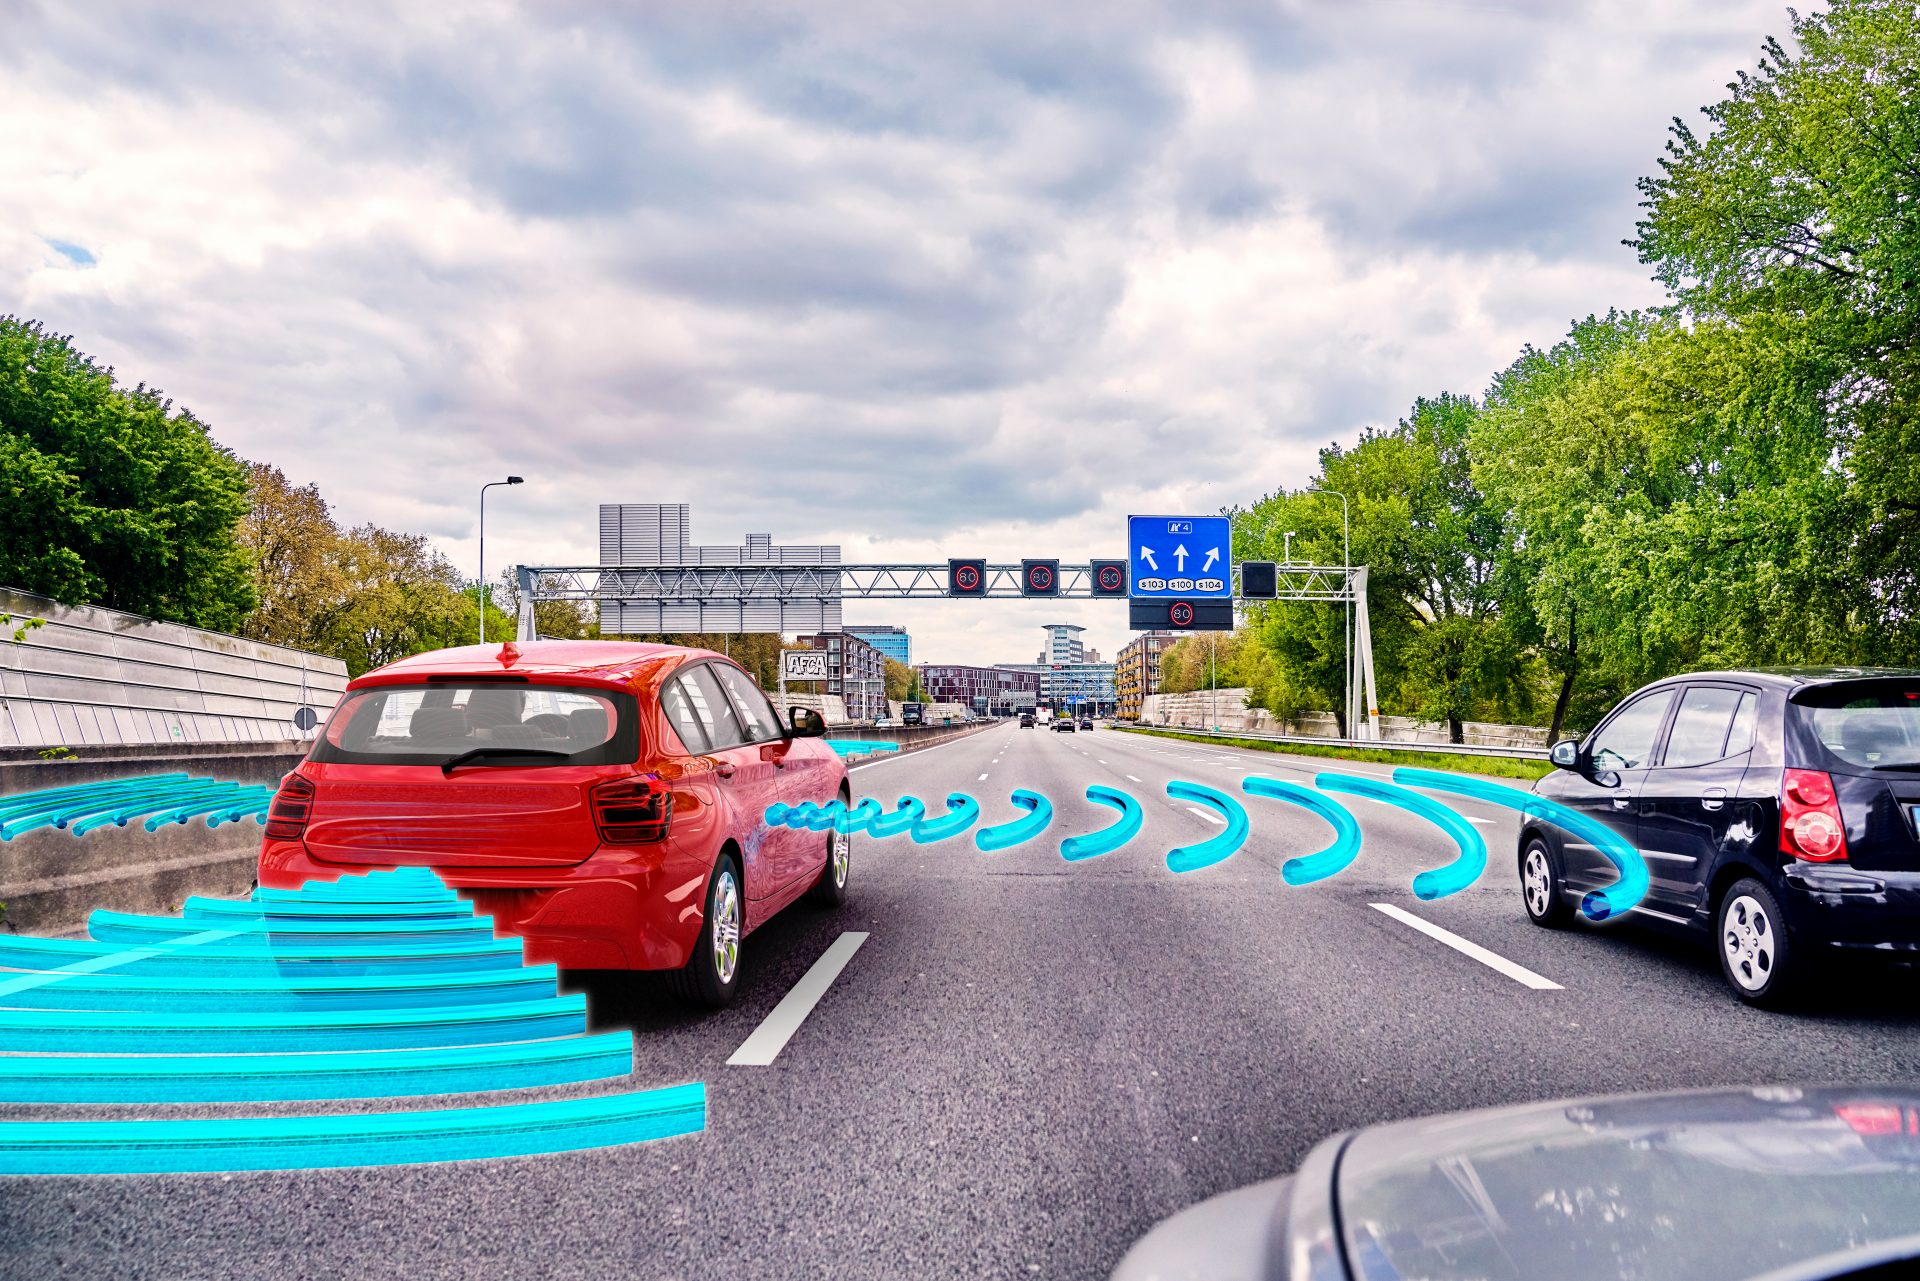 2019 <br> AUTOMATED VEHICLES